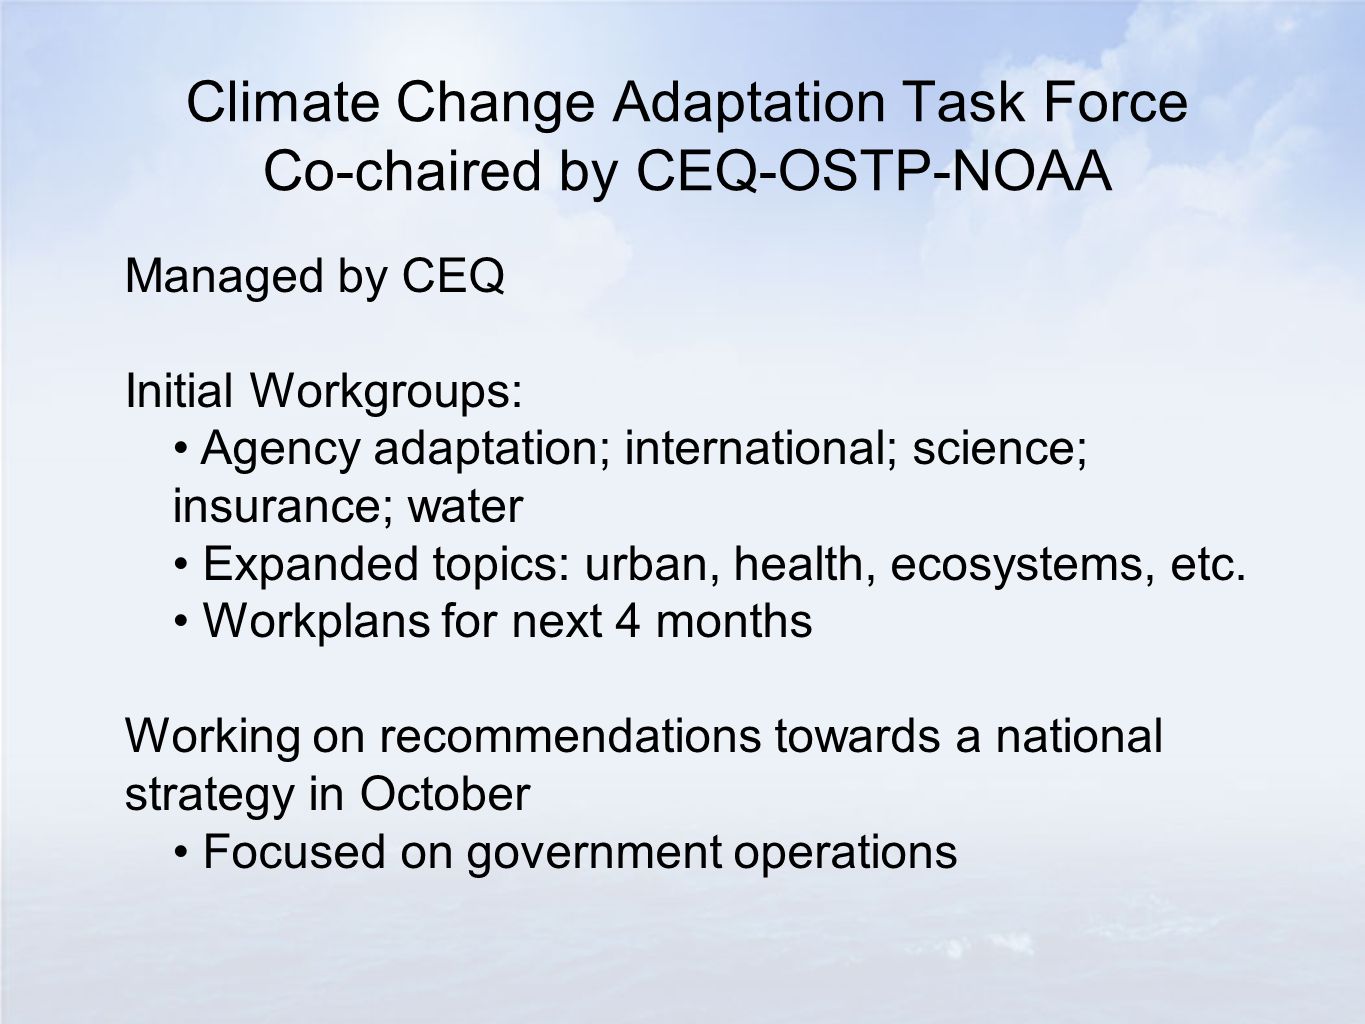 Climate Change Adaptation Task Force Co-chaired by CEQ-OSTP-NOAA Managed by CEQ Initial Workgroups: Agency adaptation; international; science; insurance; water Expanded topics: urban, health, ecosystems, etc.